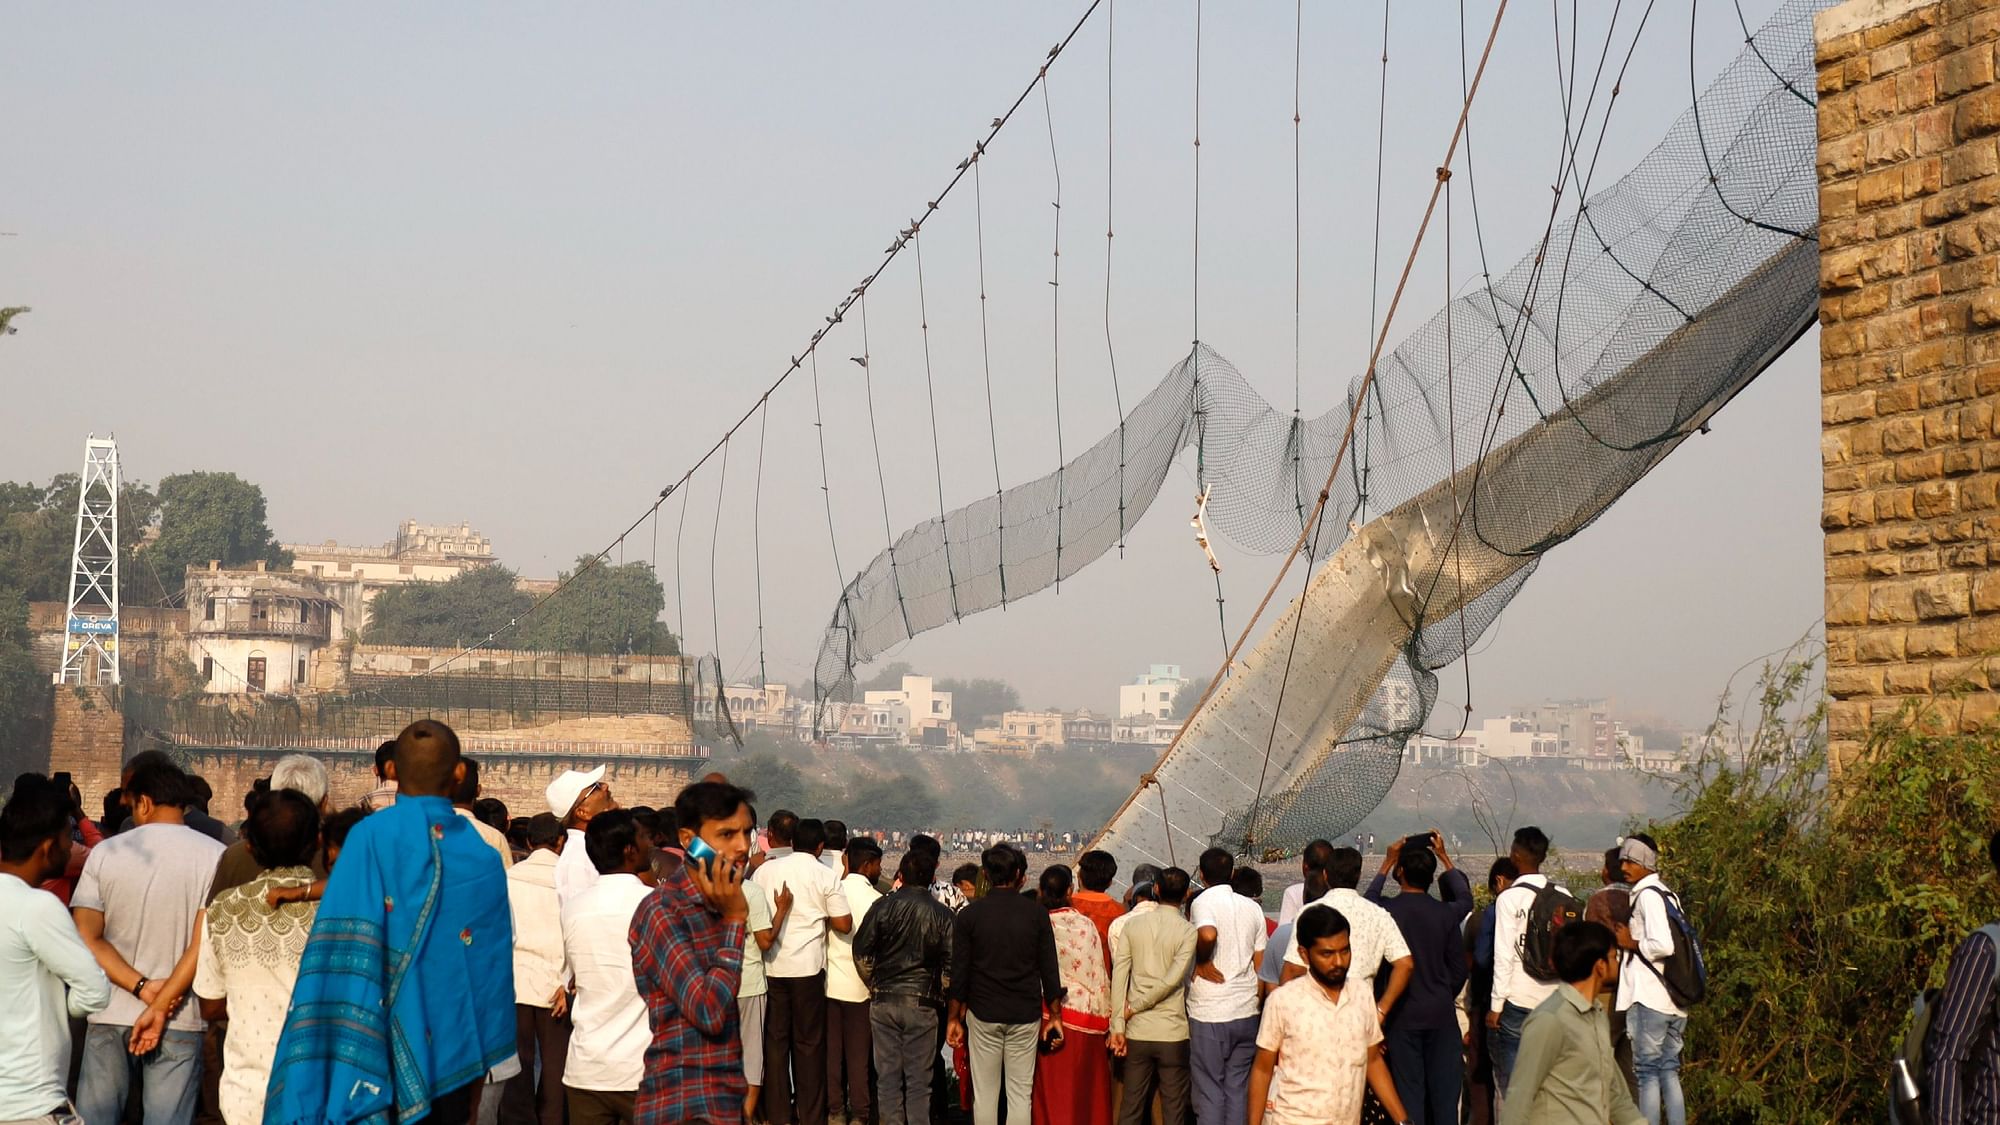 <div class="paragraphs"><p>Morbi: People gather at the site during a rescue operation after the collapse of a suspension bridge over the Machchhu river, in Morbi district, Monday, Oct. 31, 2022.</p></div>